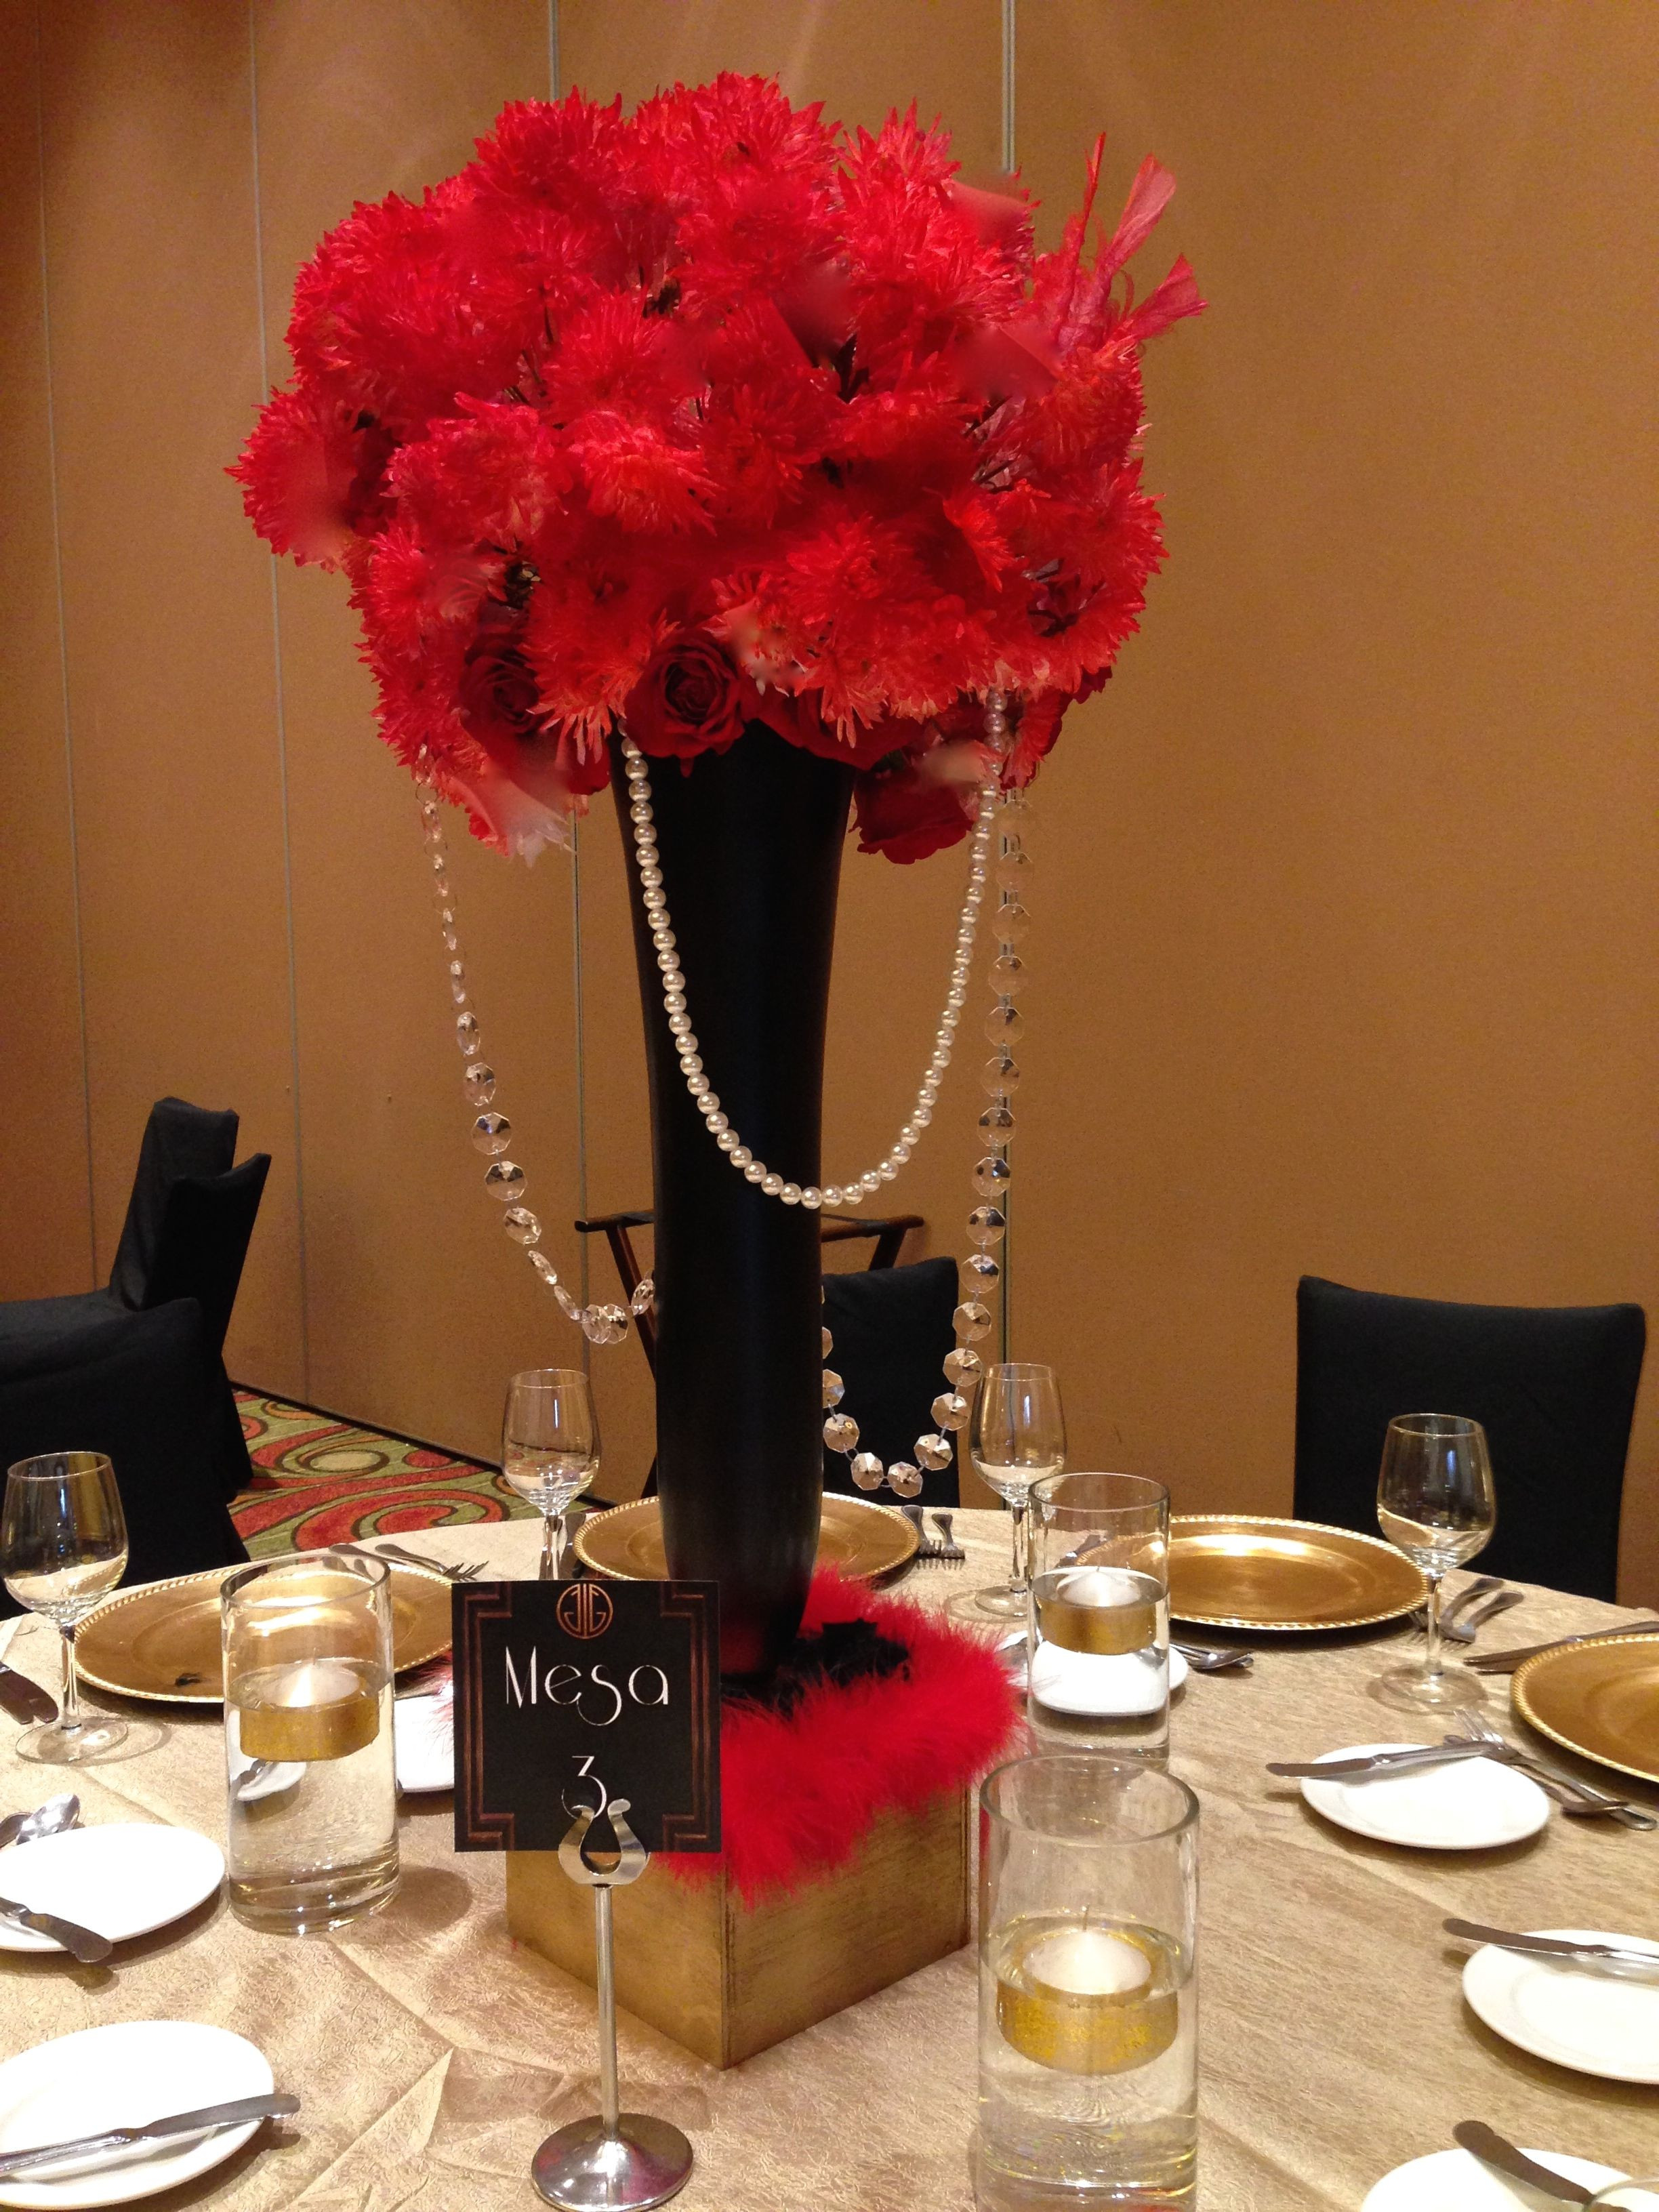 16 attractive Tall Crystal Vases for Centerpieces 2024 free download tall crystal vases for centerpieces of tall centerpiece red roses and black vases great gatsby theme intended for tall centerpiece red roses and black vases great gatsby theme